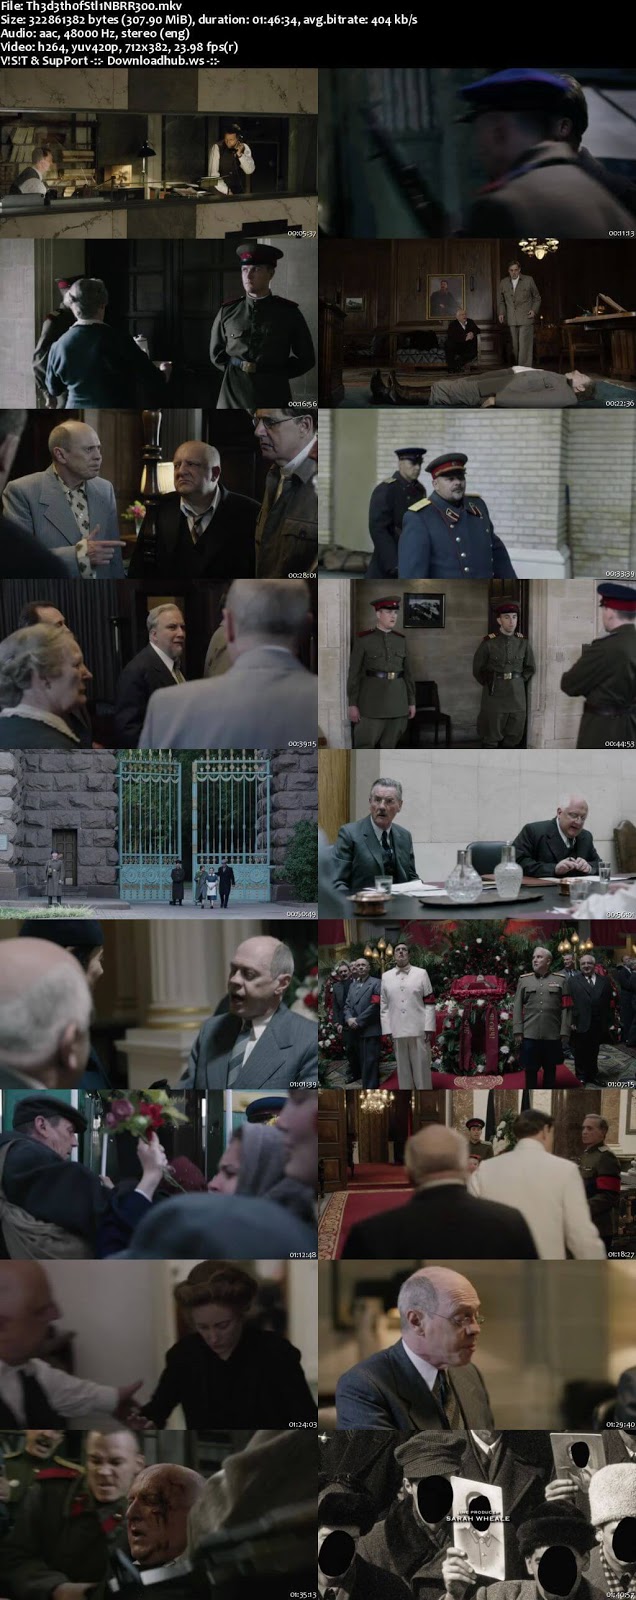 The Death of Stalin 2017 English 480p BRRip ESubs